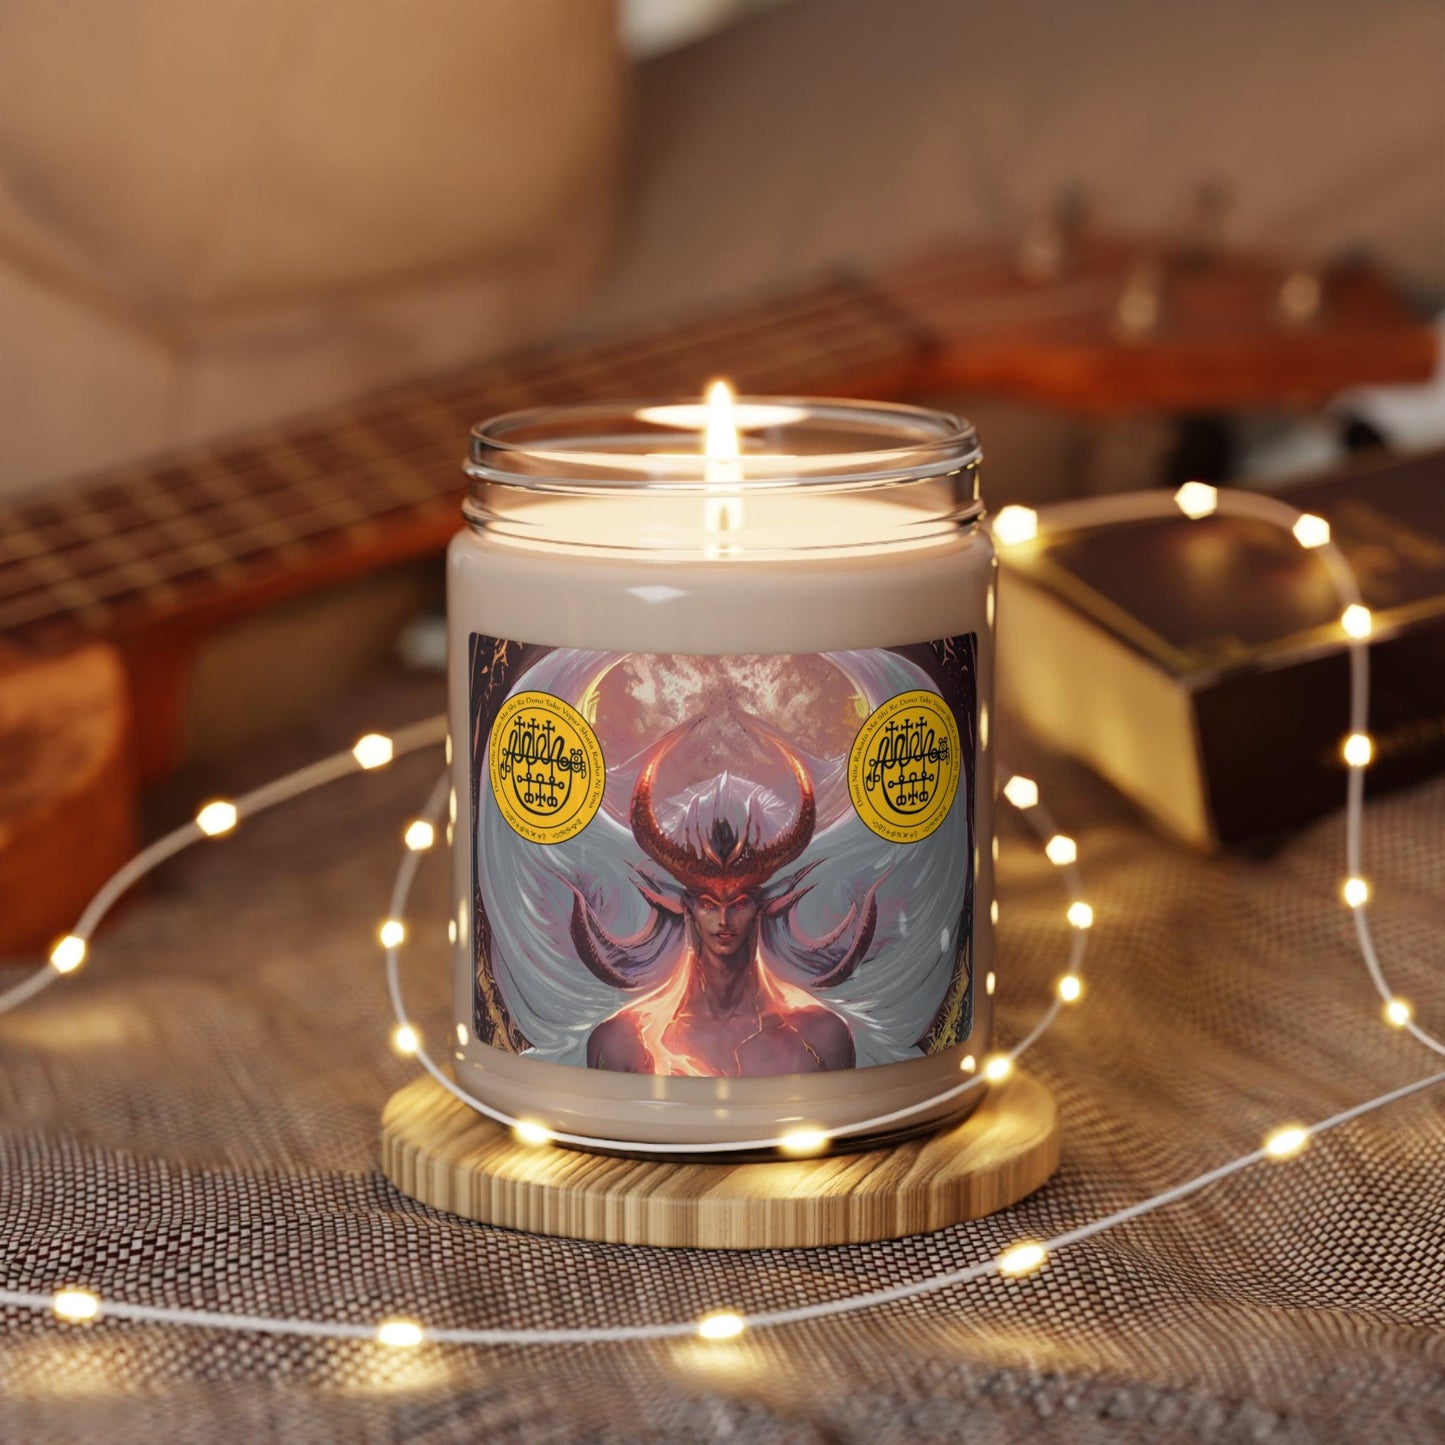 Demon-Vepar-Altar-Scented-Soy-Candle-for-offerings-rituals-initiations-o-praying-and-medtation-3